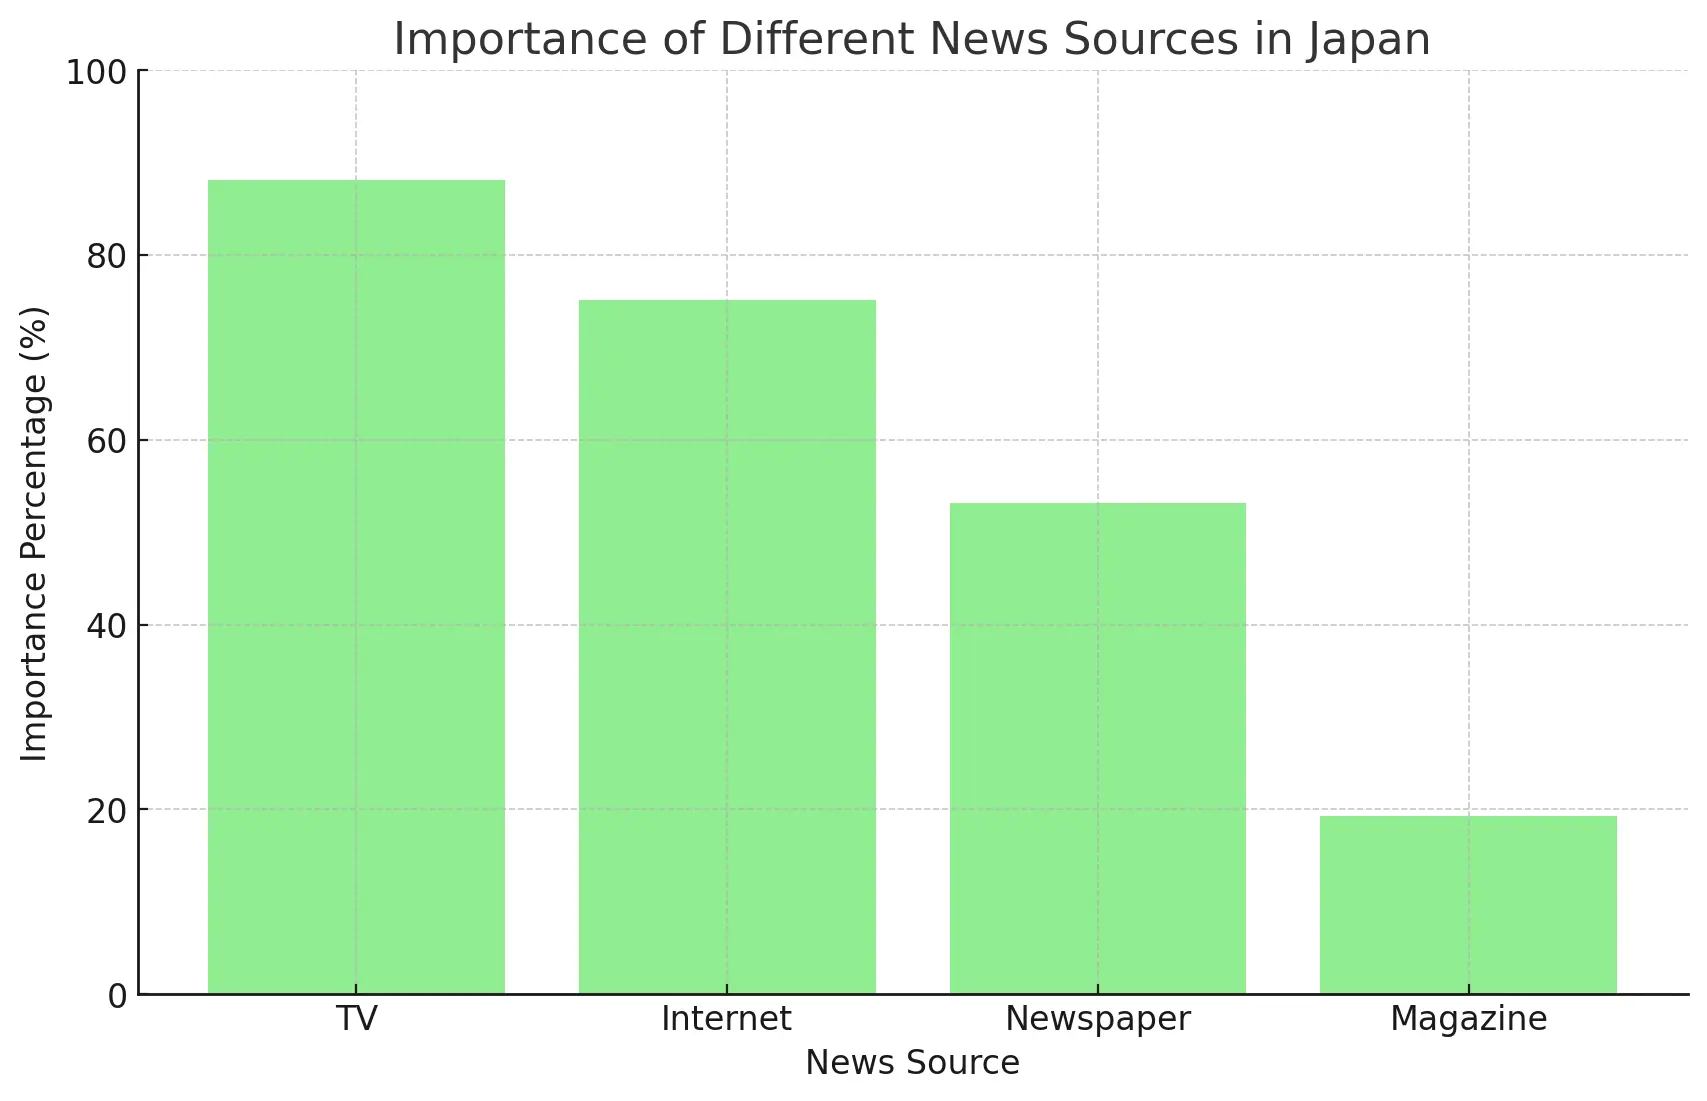 Perceived importance of different news sources in Japan